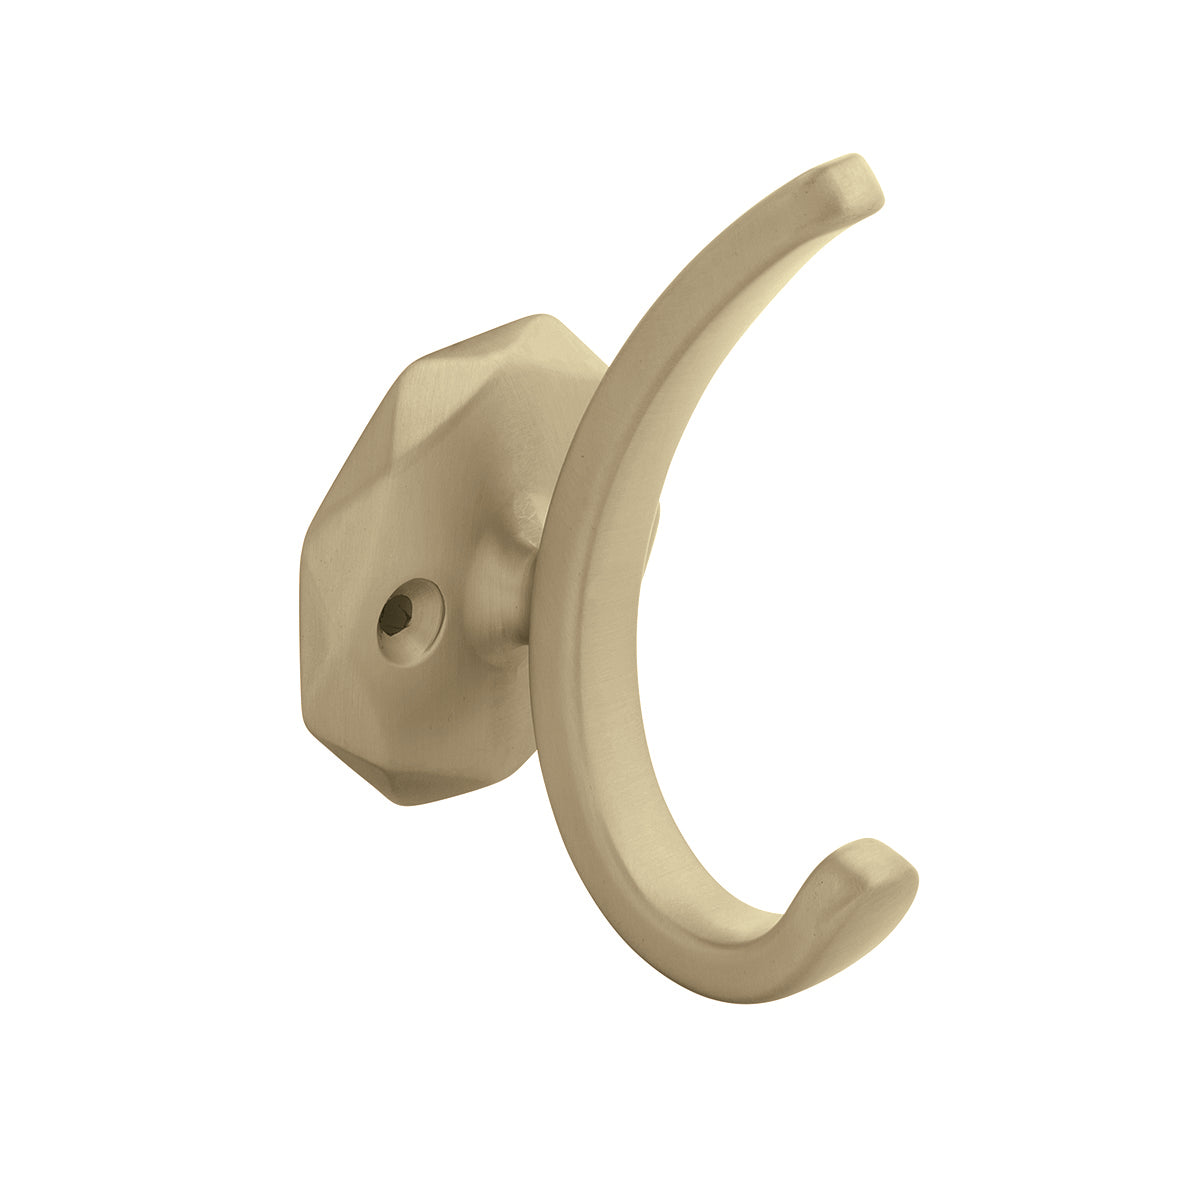 Signature Hardware 910387 Classic Brass Double Hook - Nickel, Silver